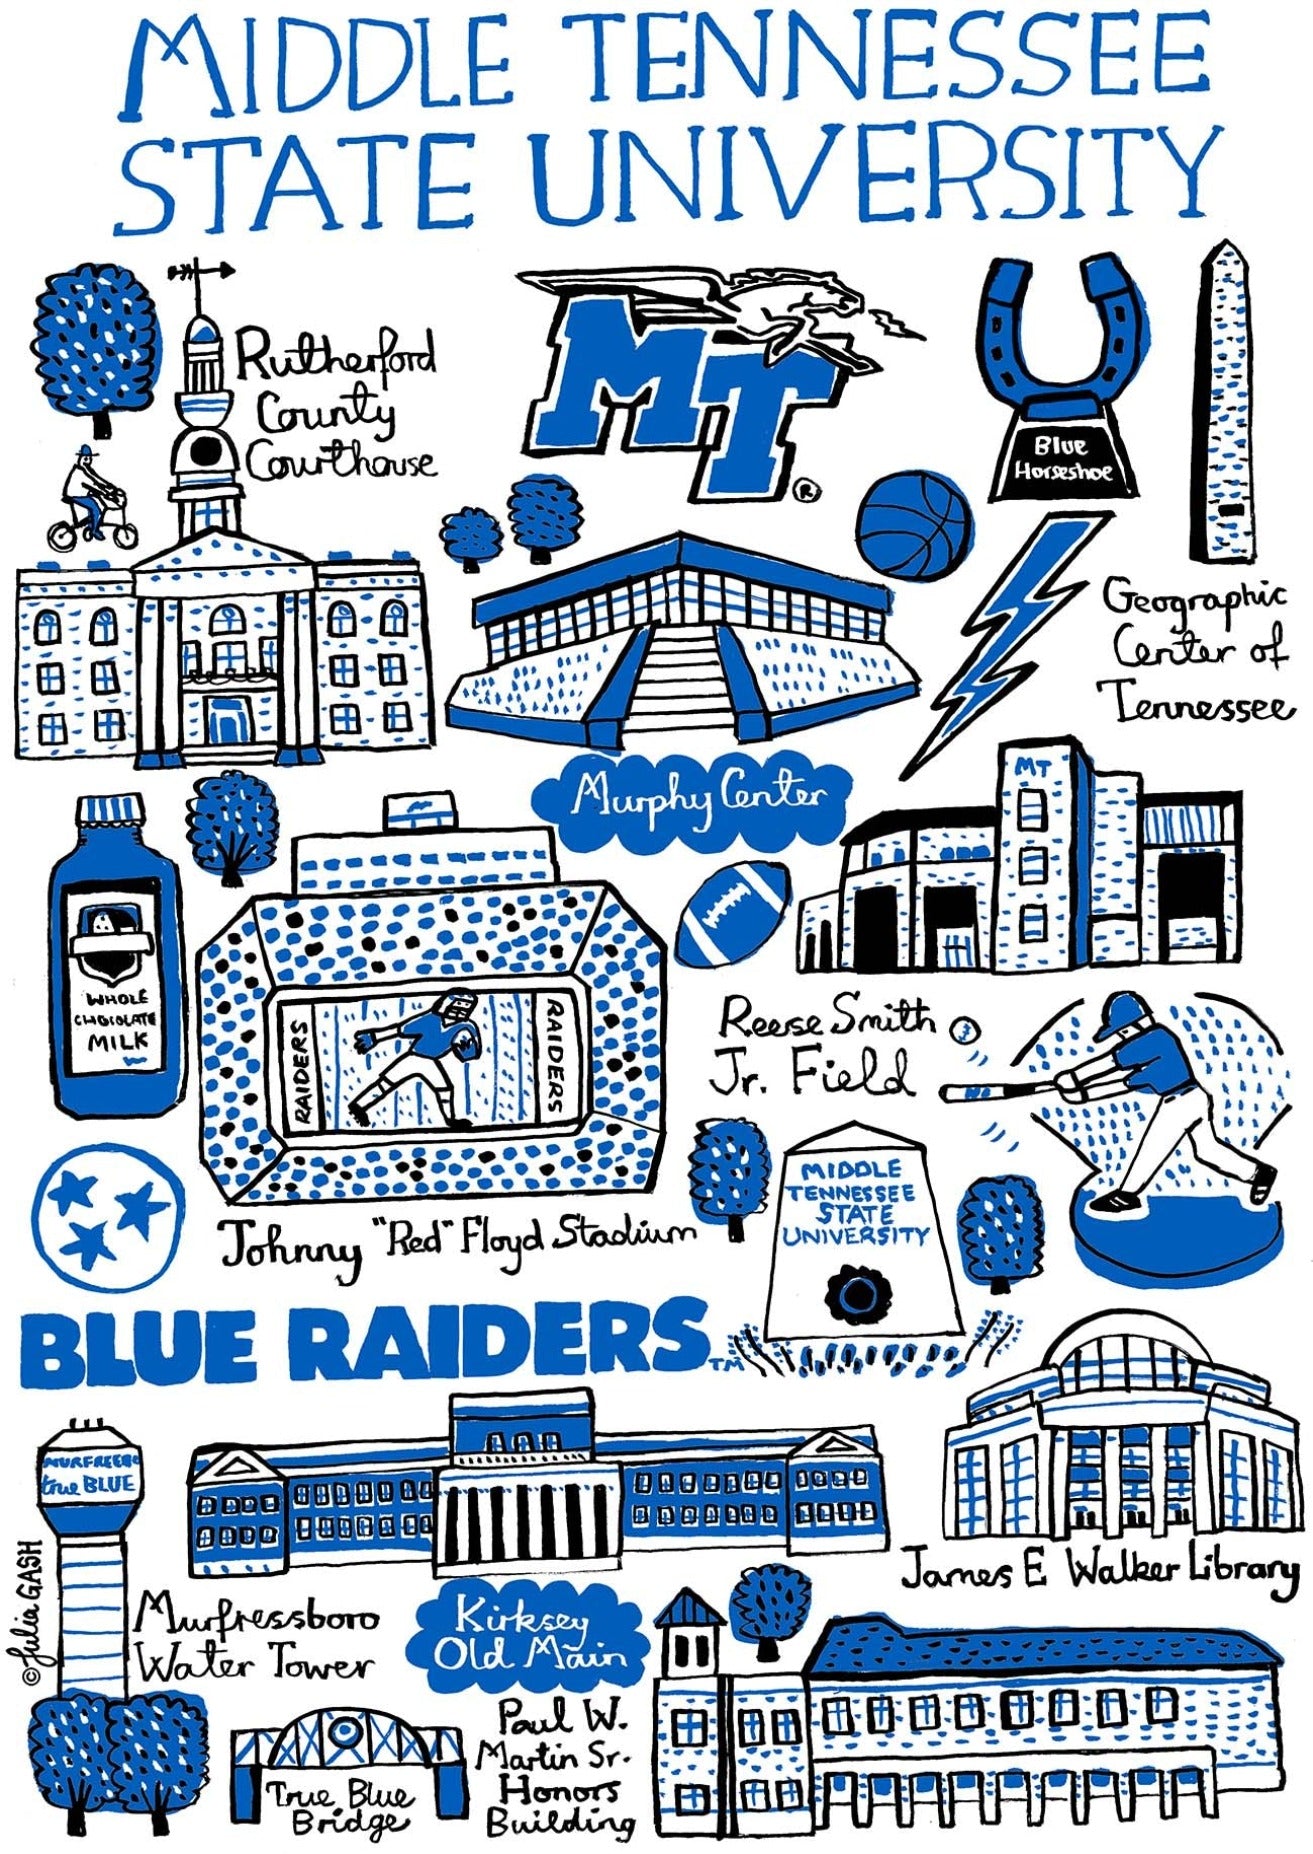 Middle Tennessee University by Julia Gash